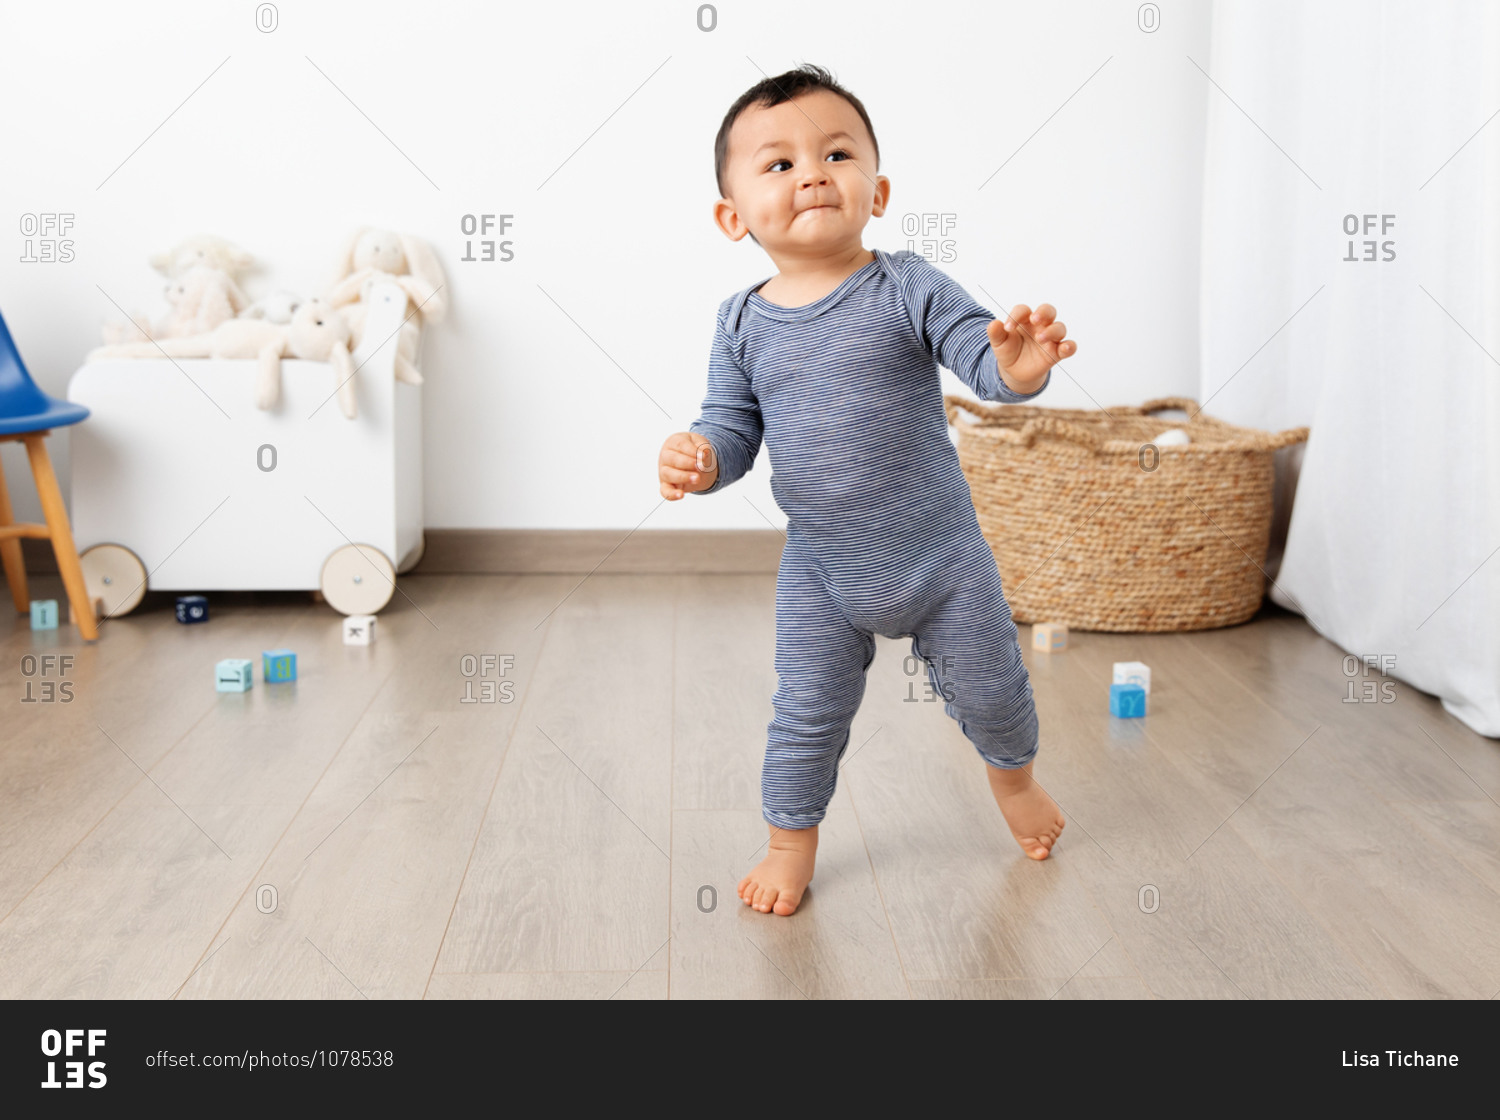 Cute toddler making first steps in playroom